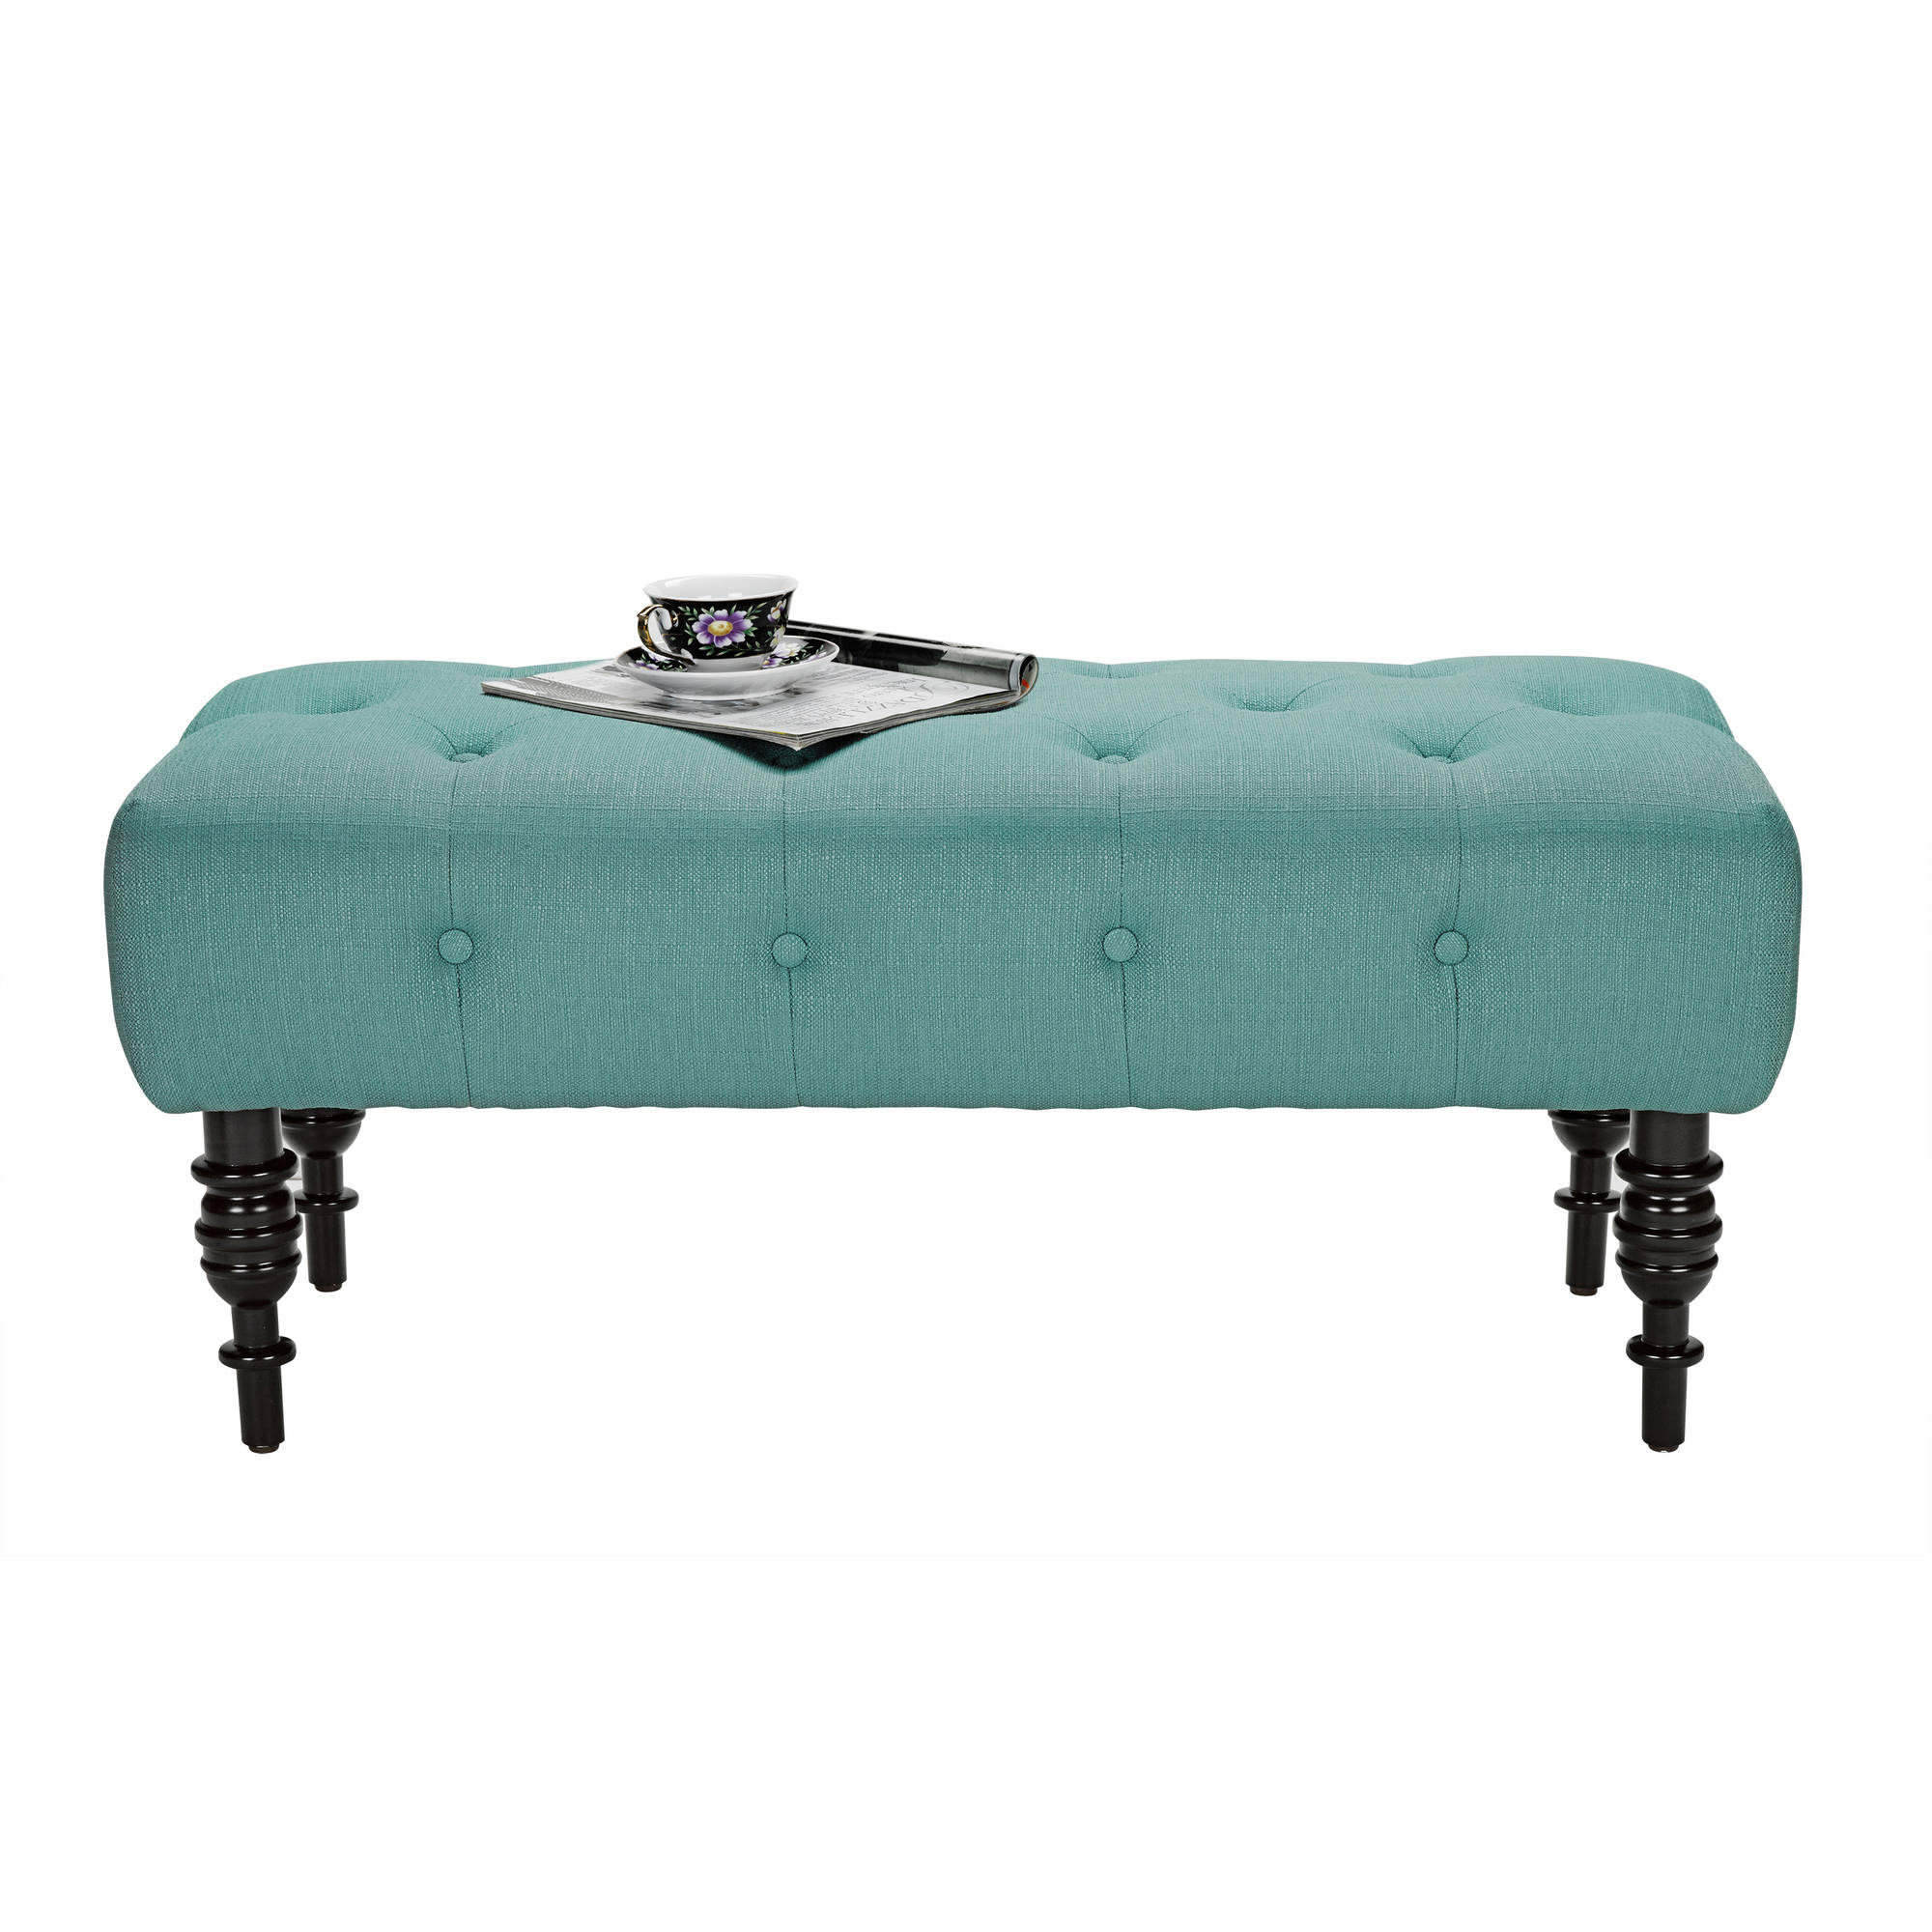 Better Homes and Gardens Traditional Tufted Bench with Turned Wood Legs, Multiple Finishes - image 3 of 3